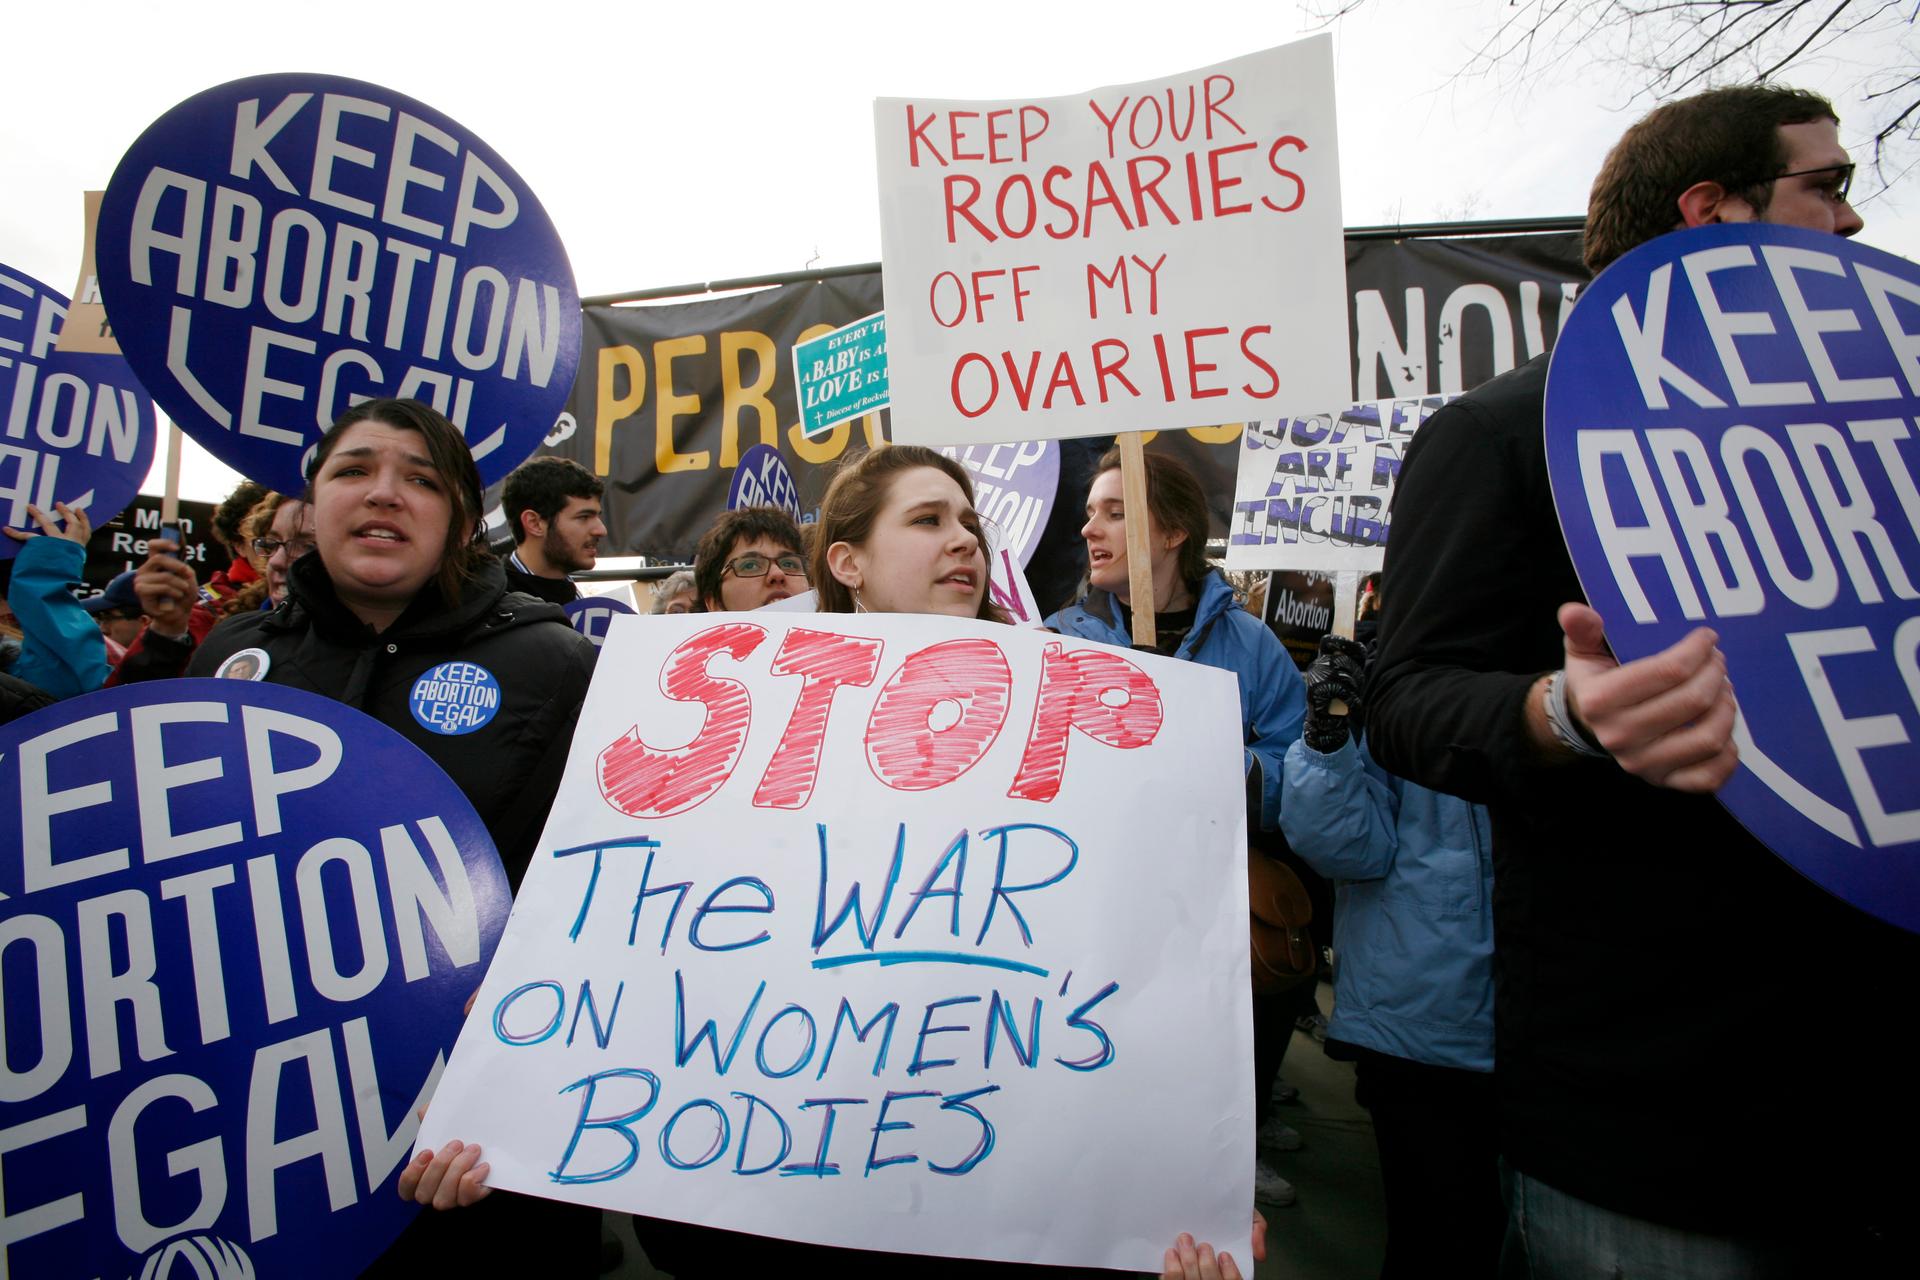 Pro-choice activists demonstrate during March for Life Fund's 37th annual march marking the anniversary of the Supreme Court's 1973 Roe v. Wade abortion decision in Washington January 22, 2010